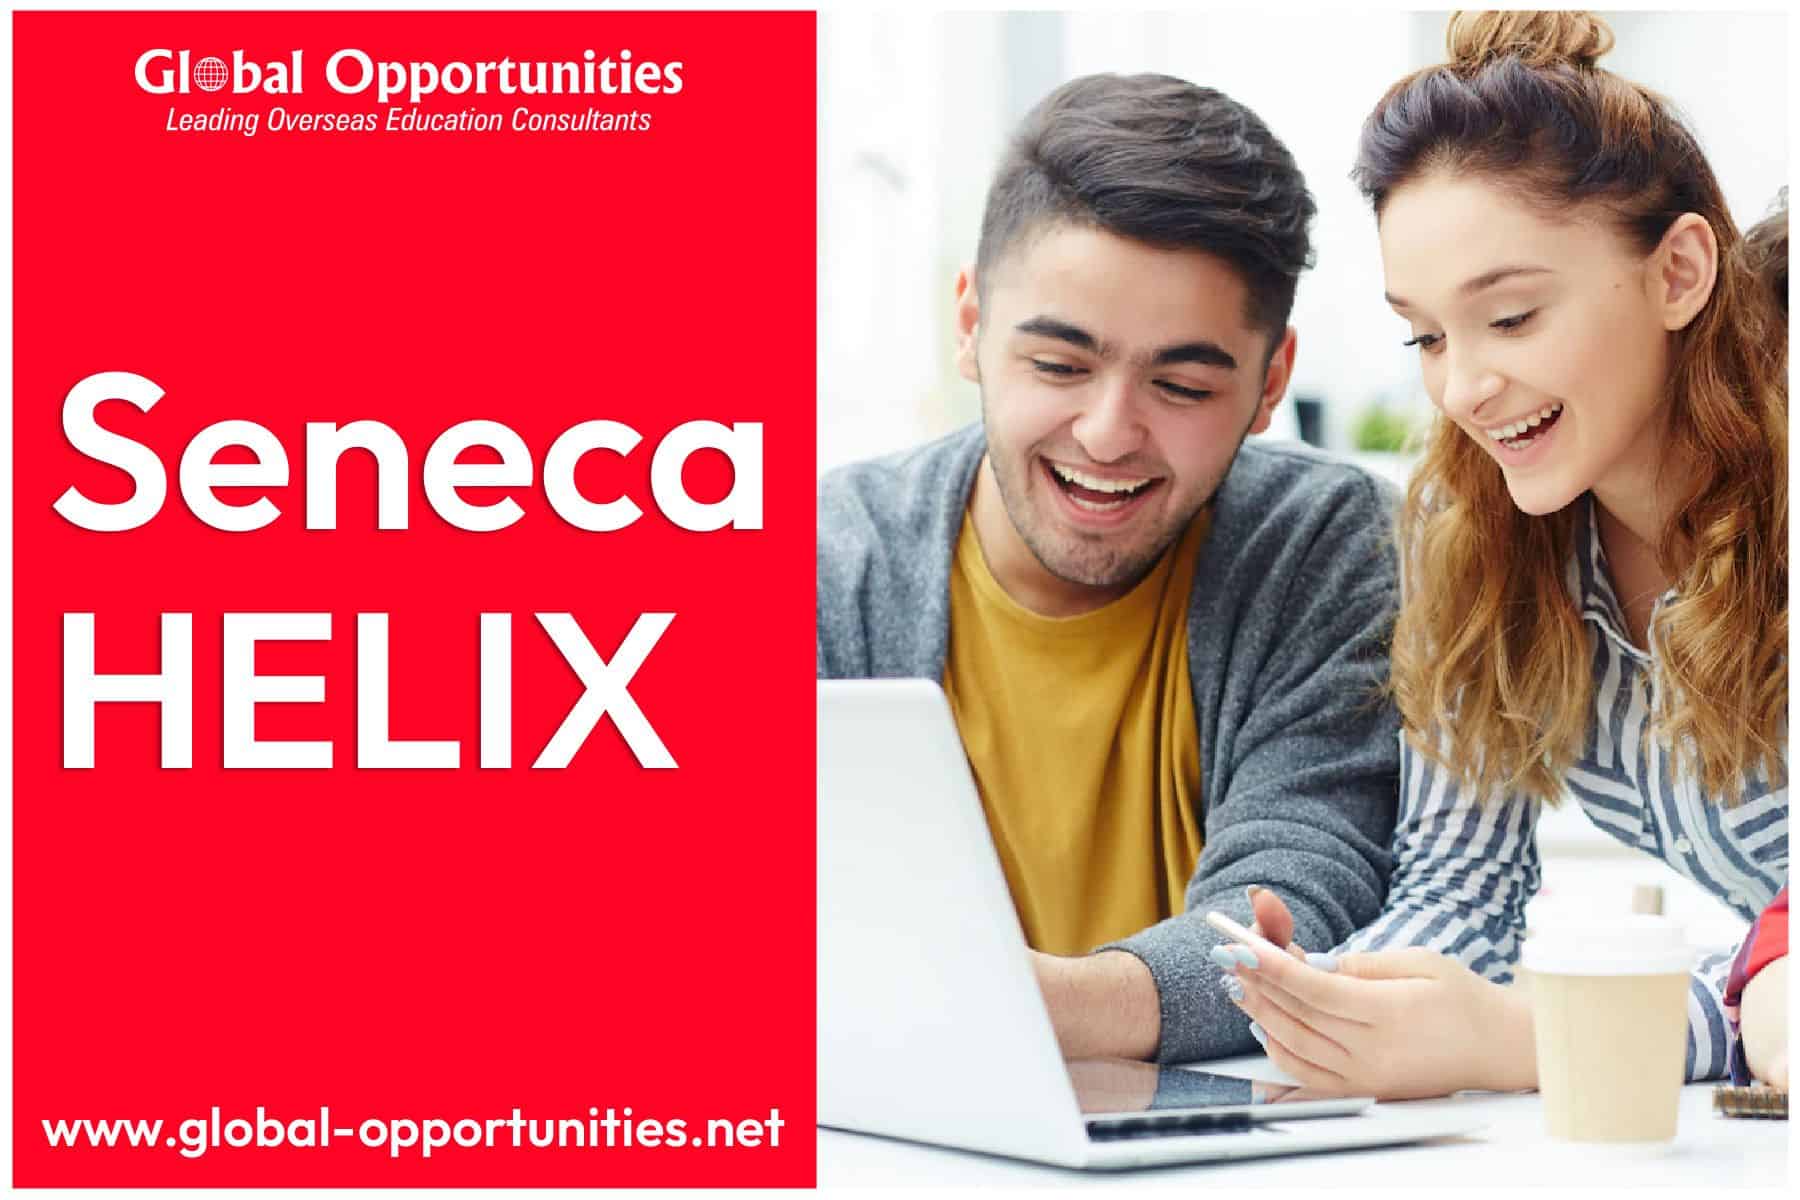 HELIX is Seneca's on-campus incubator whose goal it is to help students and participants from the larger community adopt an entrepreneurial mindset.